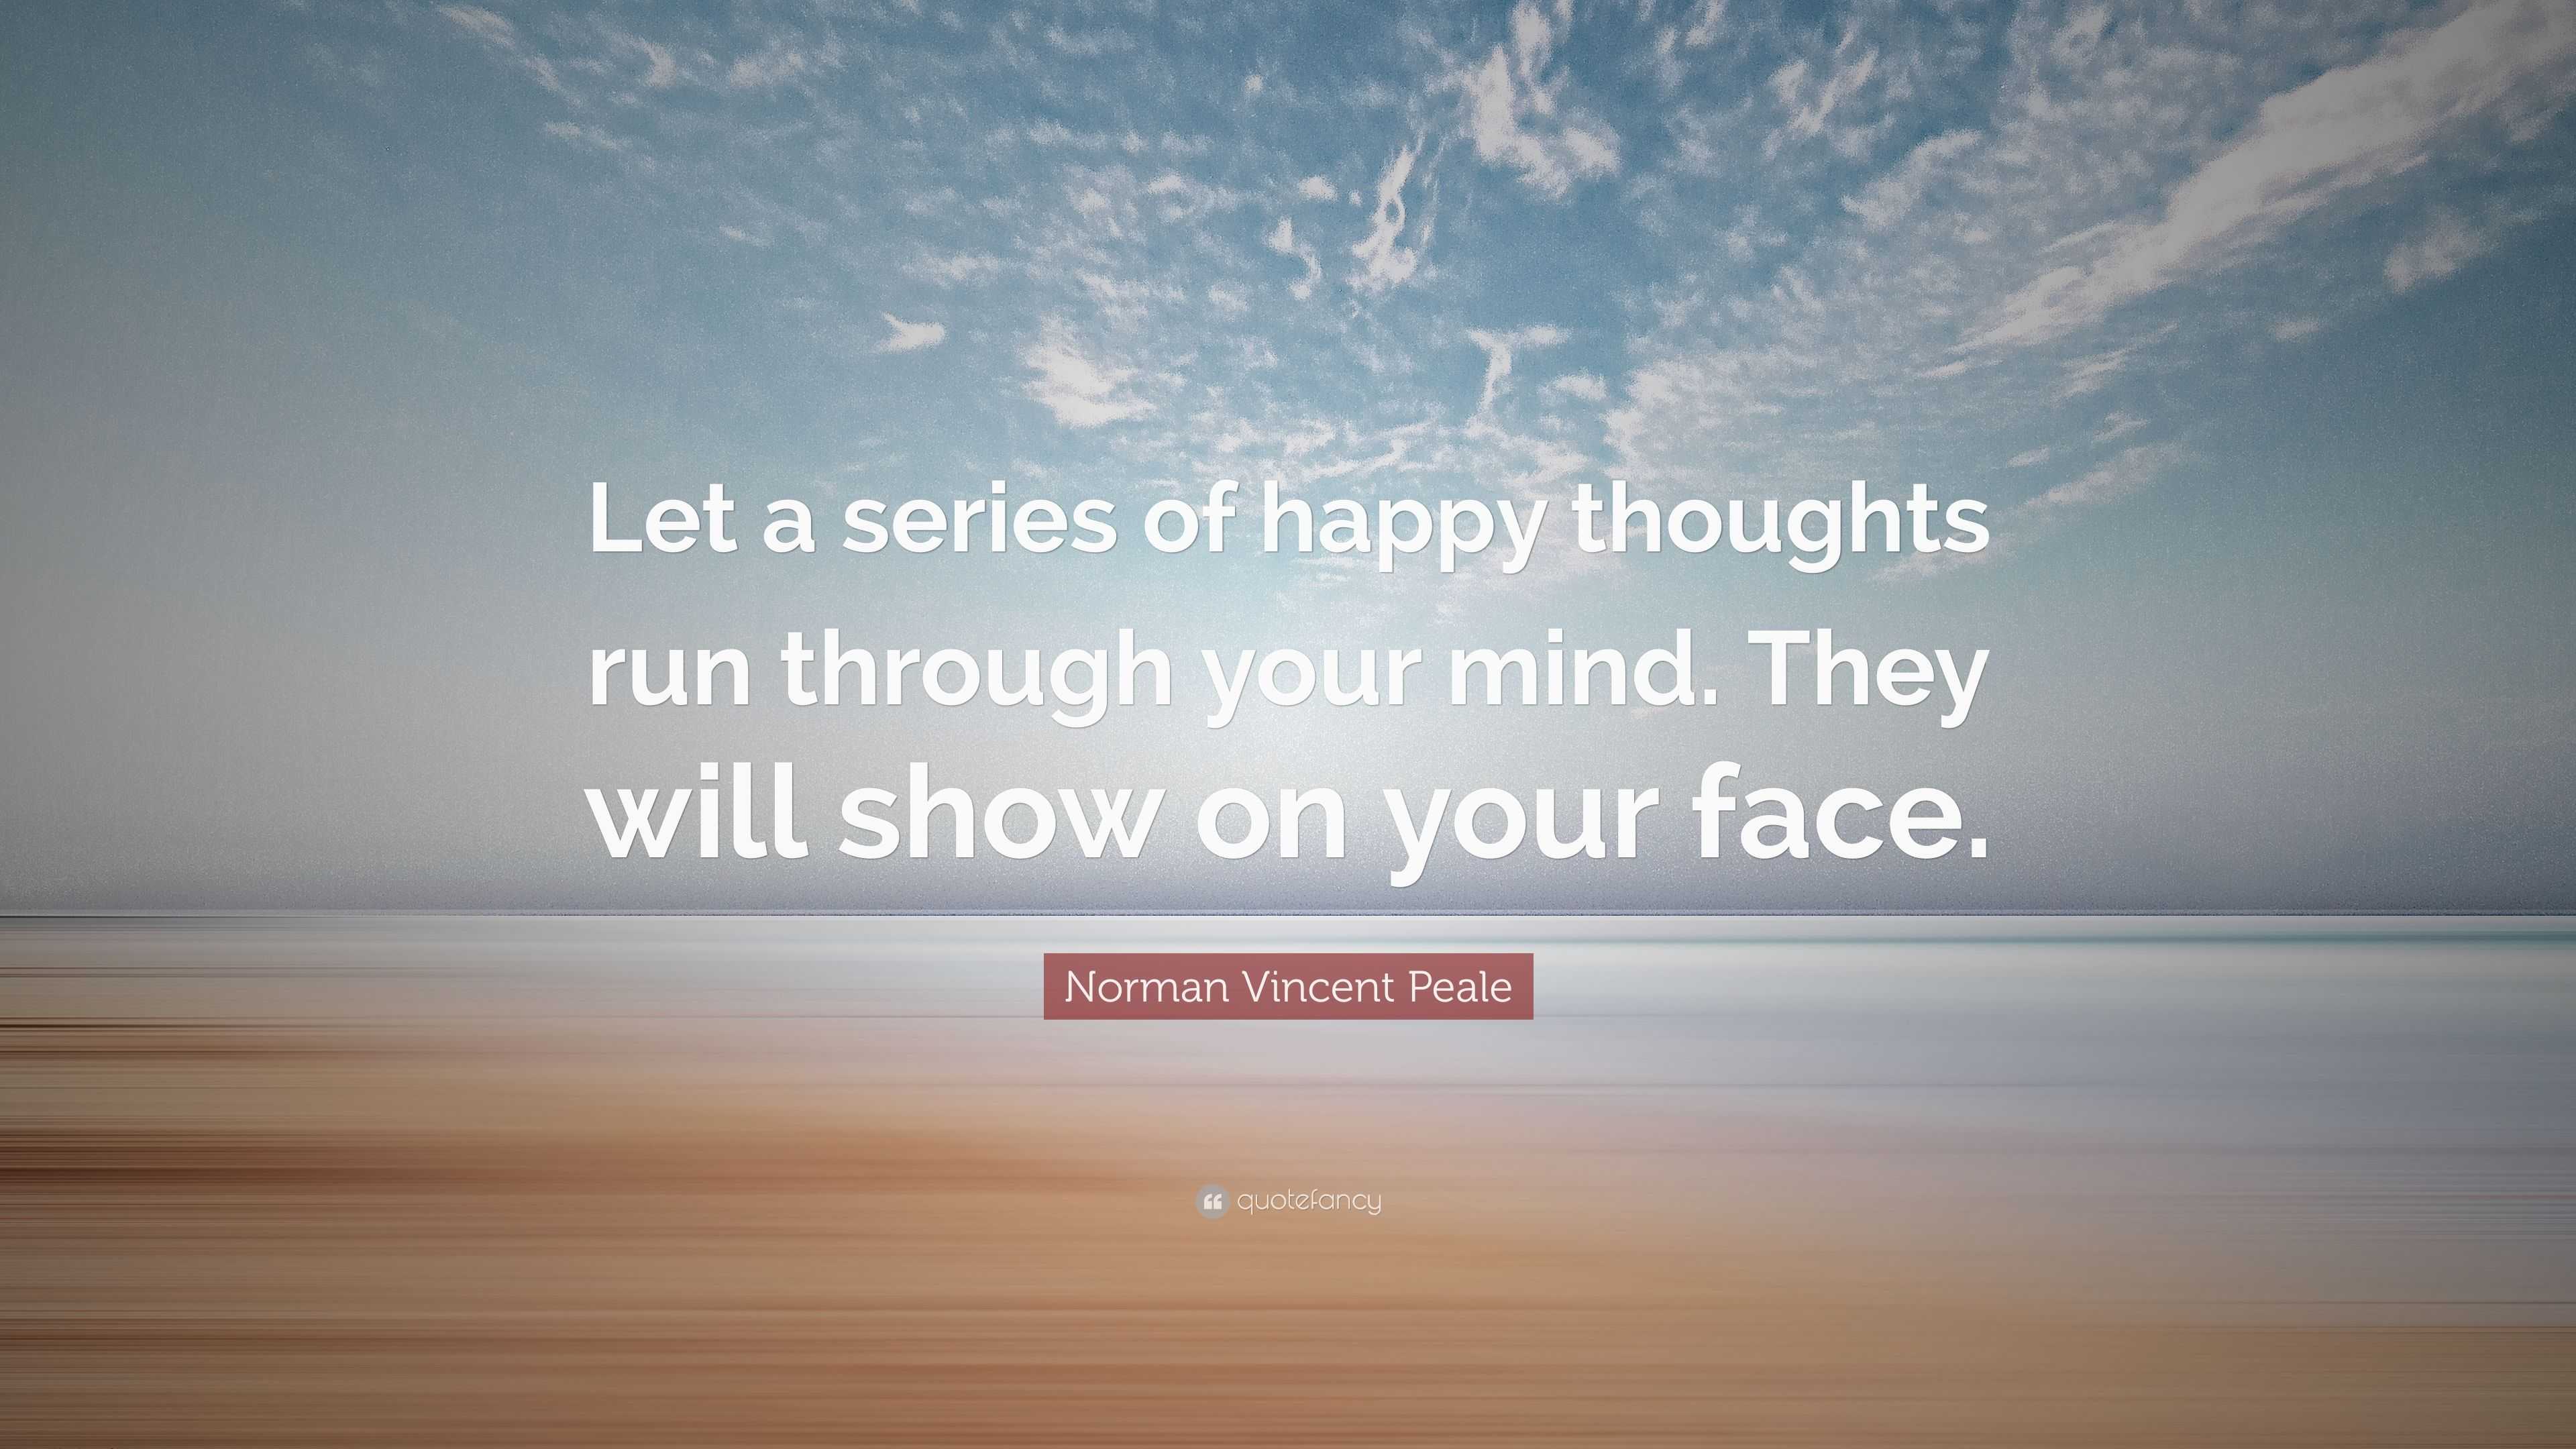 Norman Vincent Peale Quote: "Let a series of happy thoughts run through ...